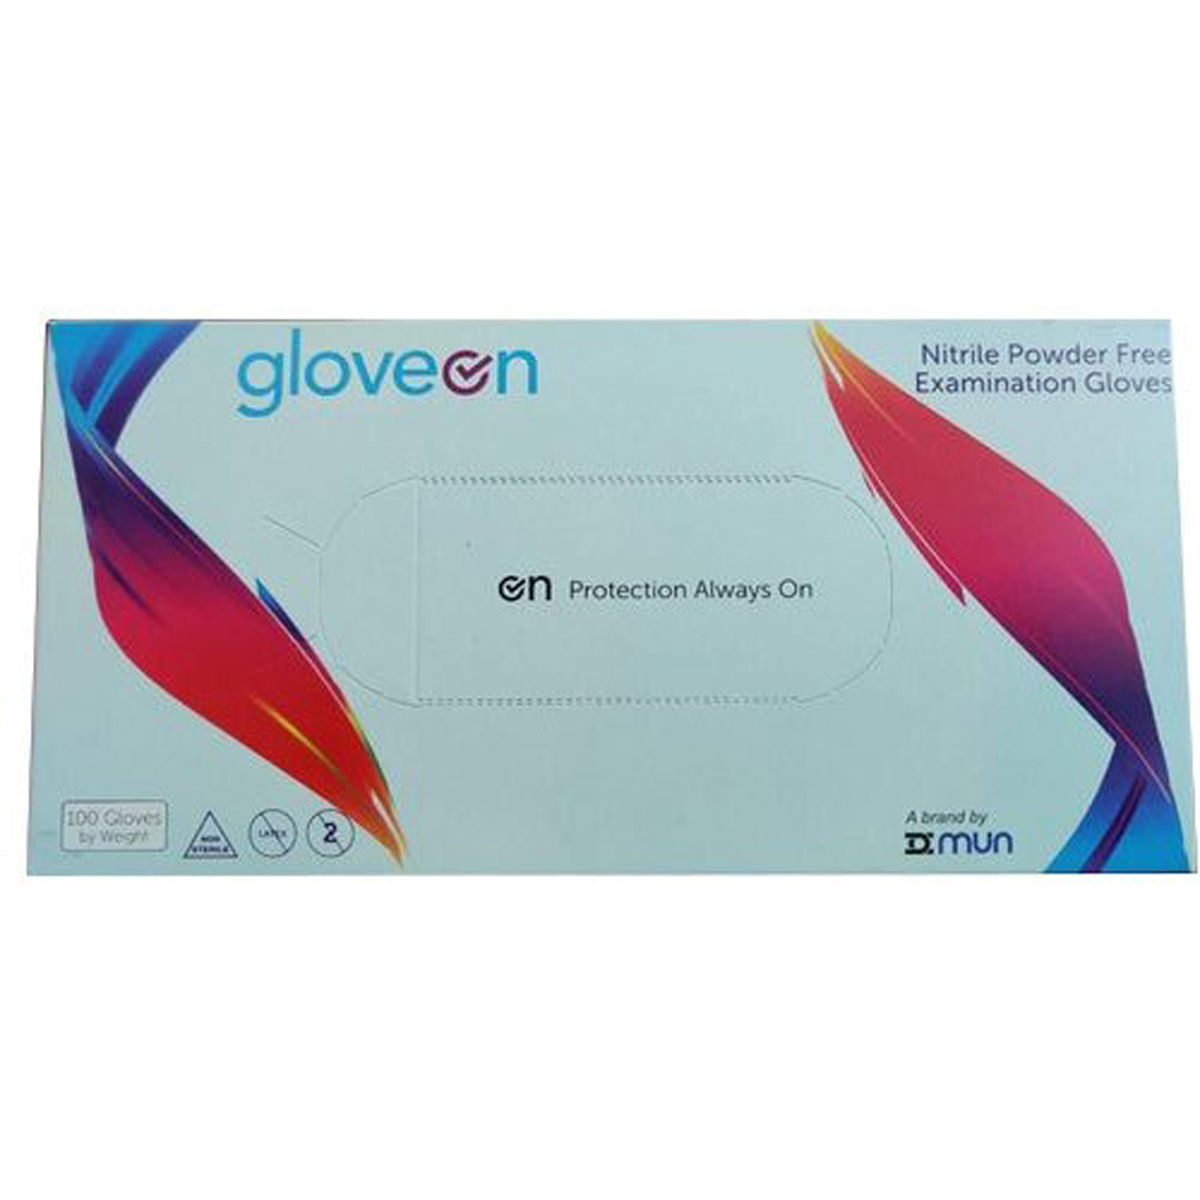 Gloveon Gloves Examination, 100 Count, Pack of 100 S